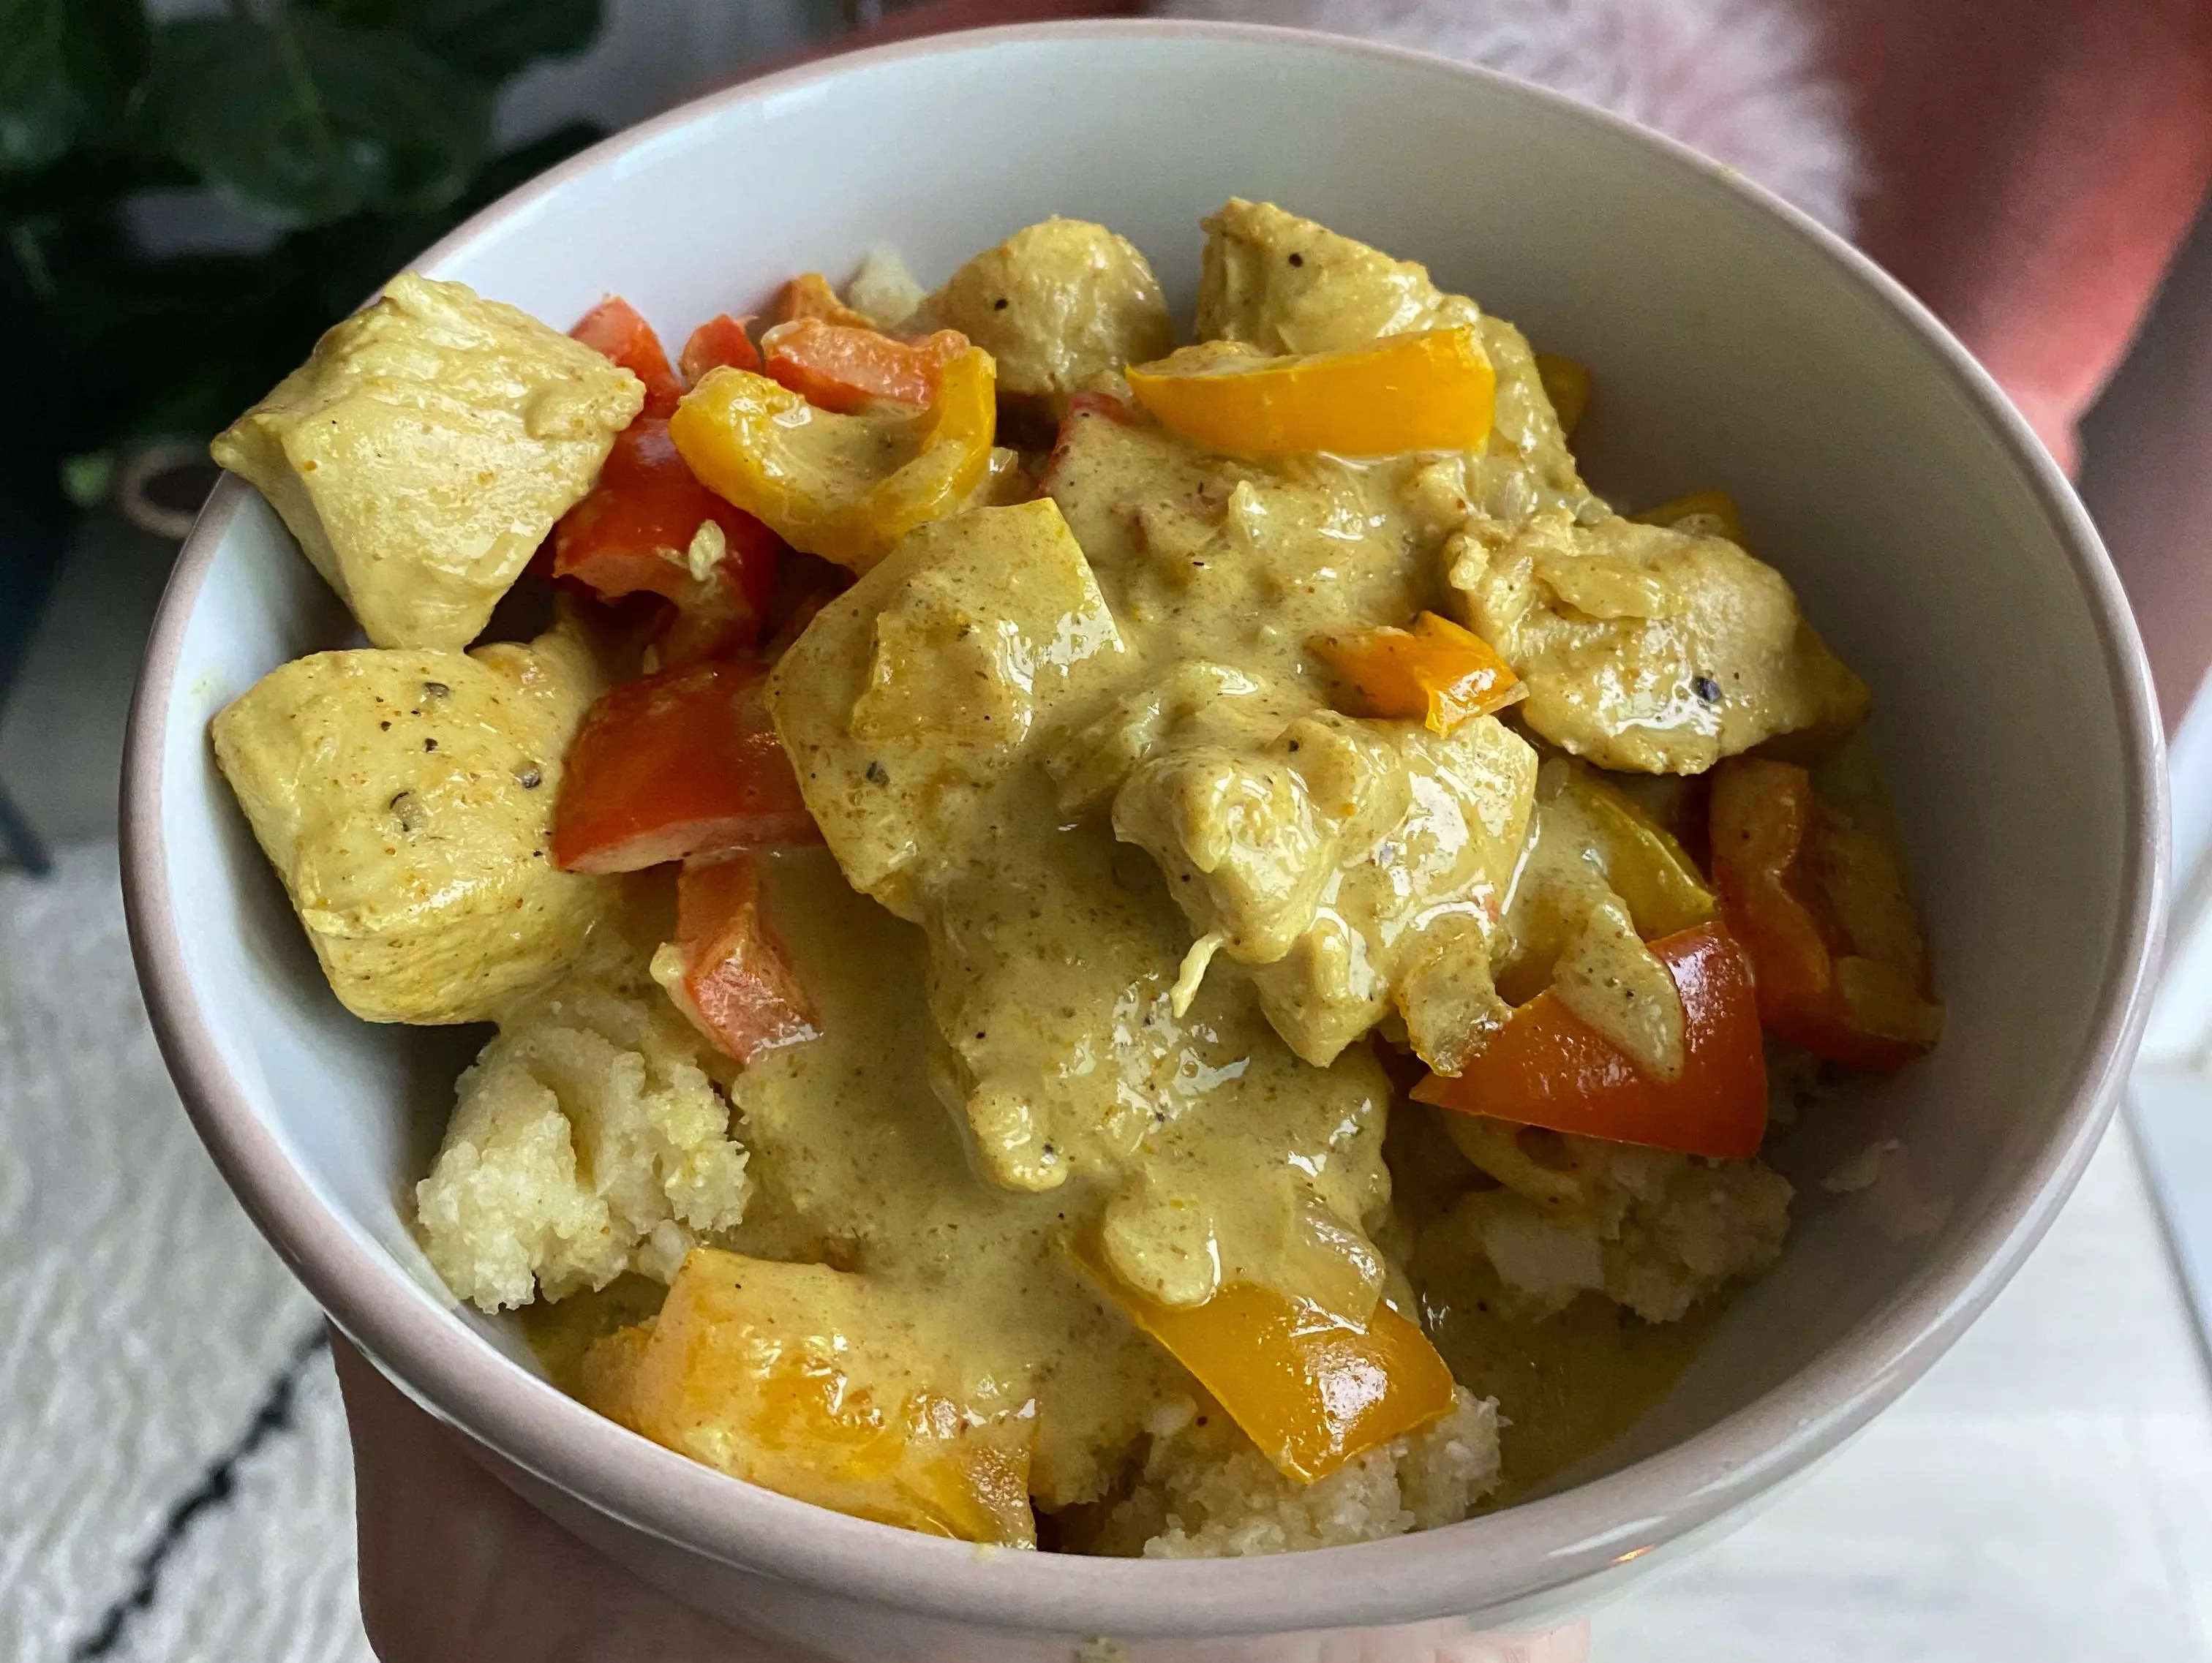 Coconut chicken curry and cauliflower rice.